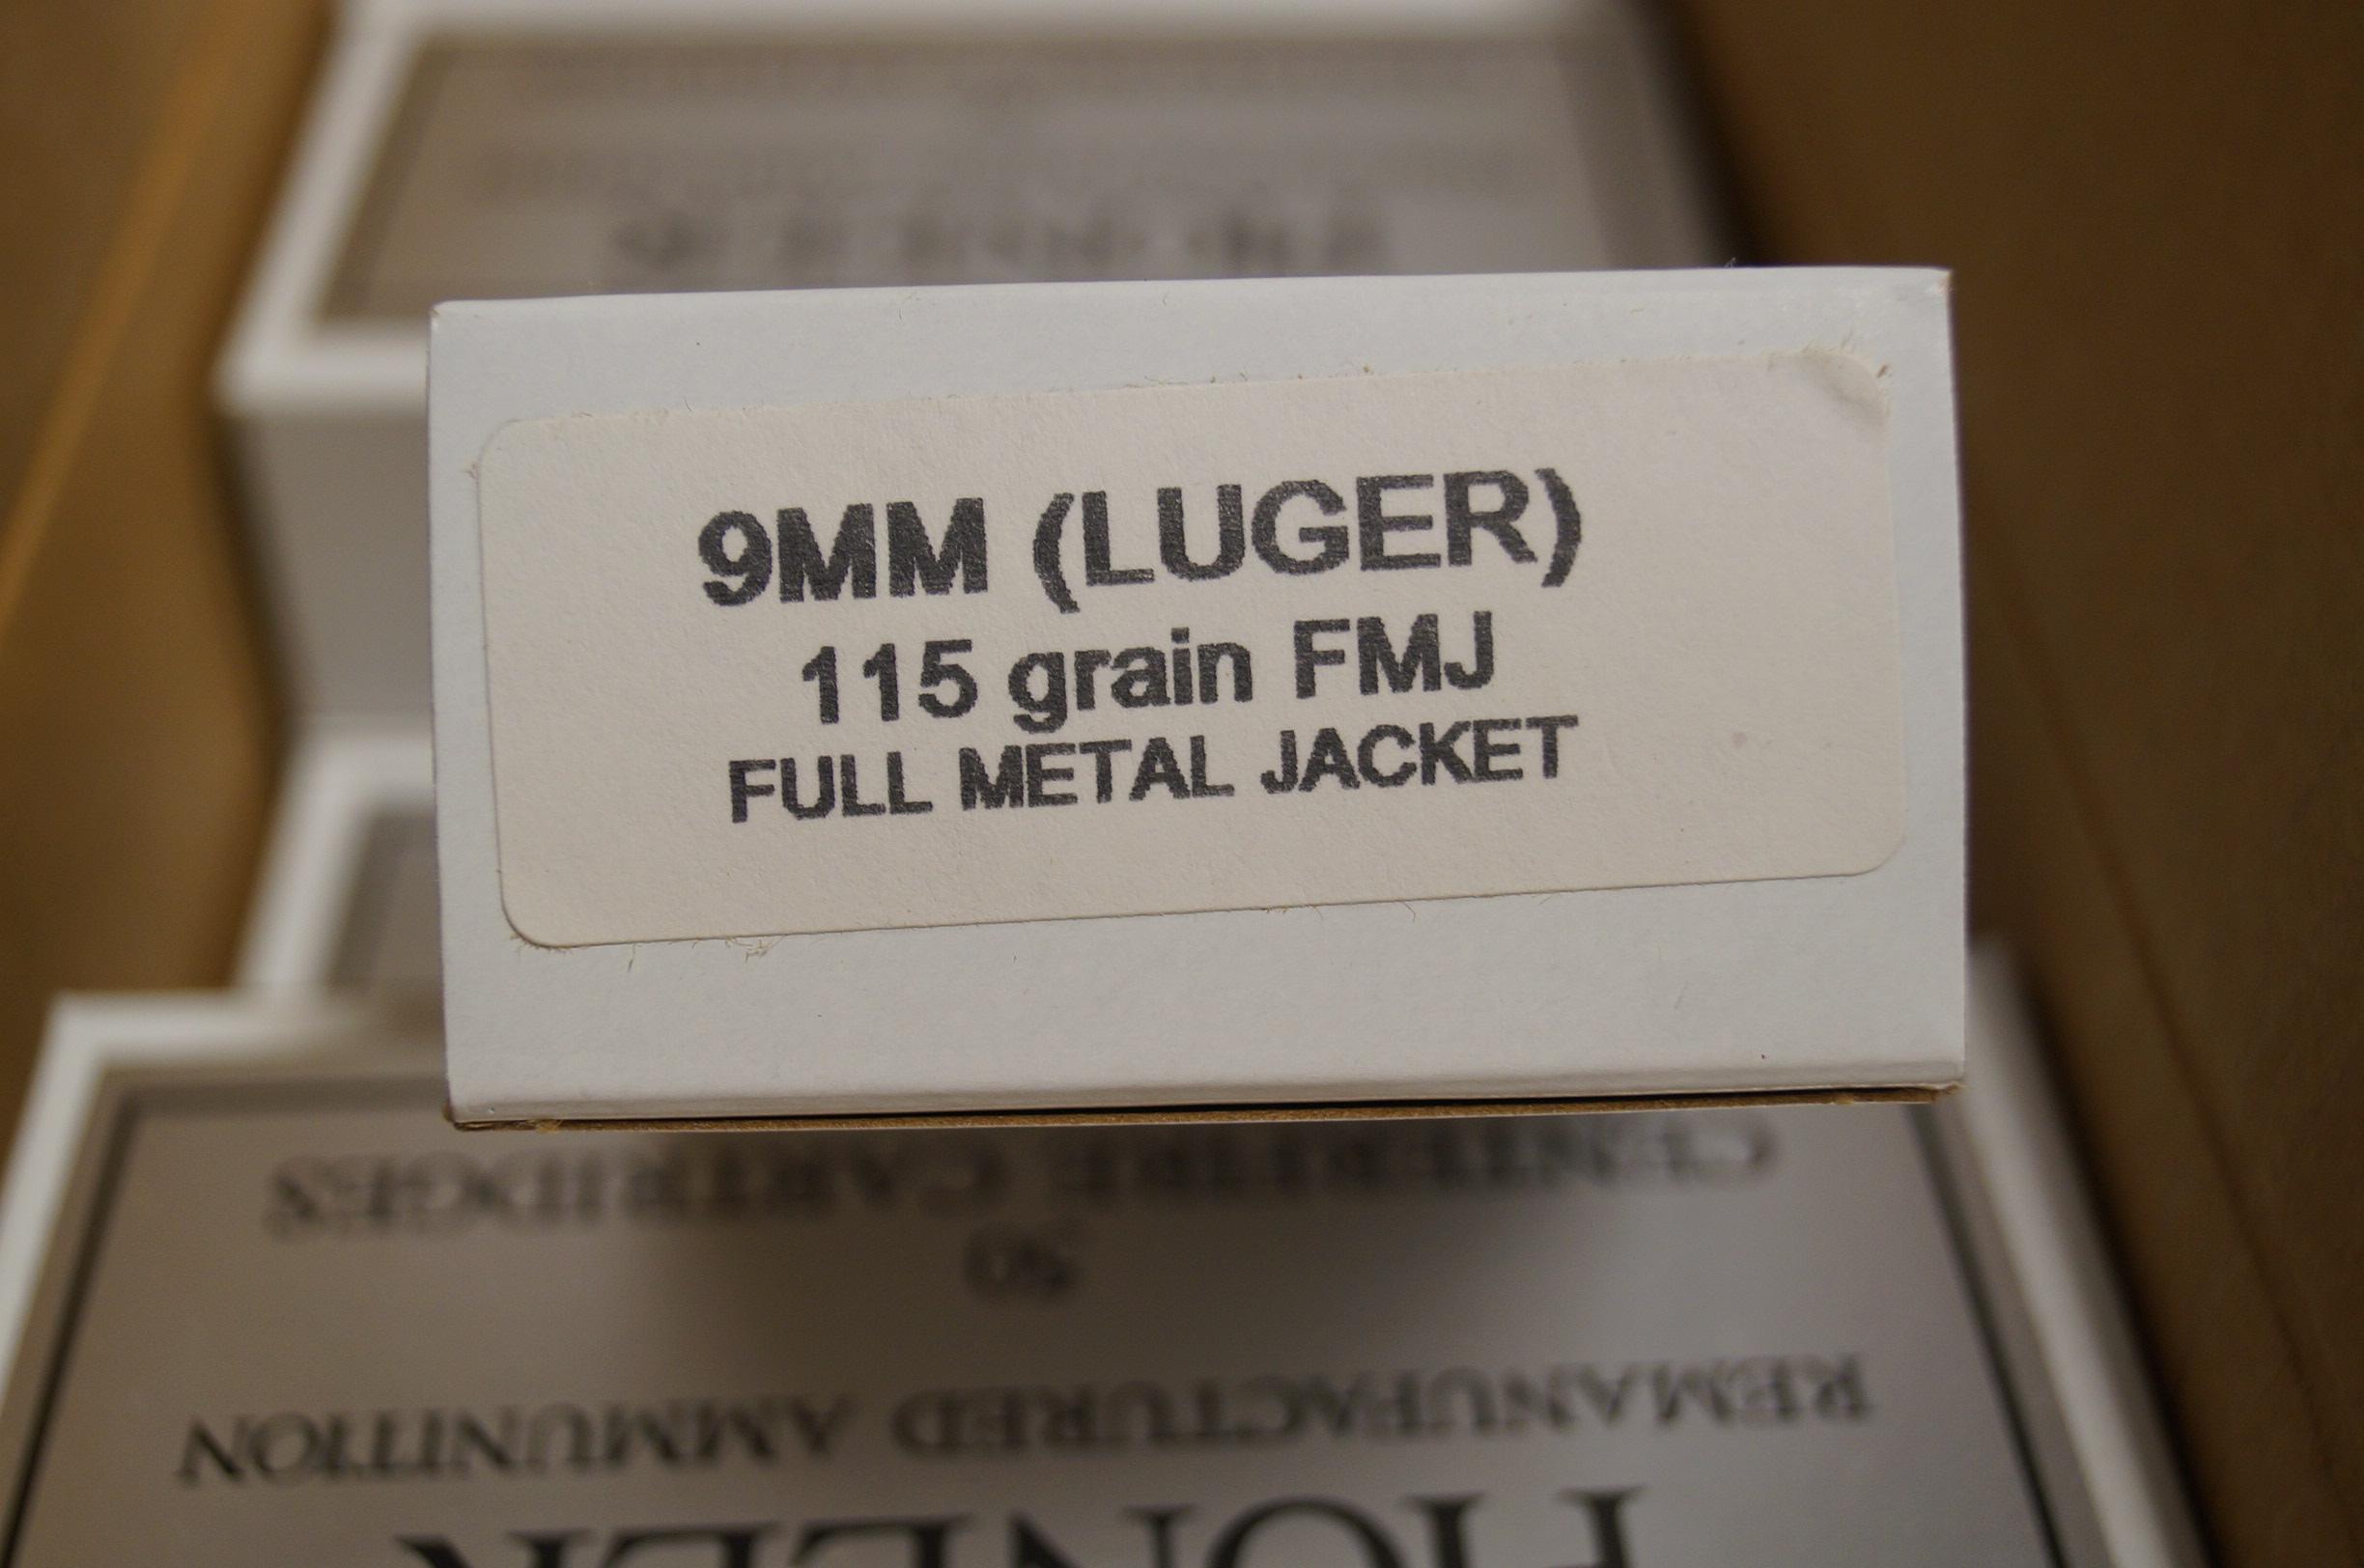 500rds. Of Pioneer 9mm Luger - 115gr. FMJ Boxed